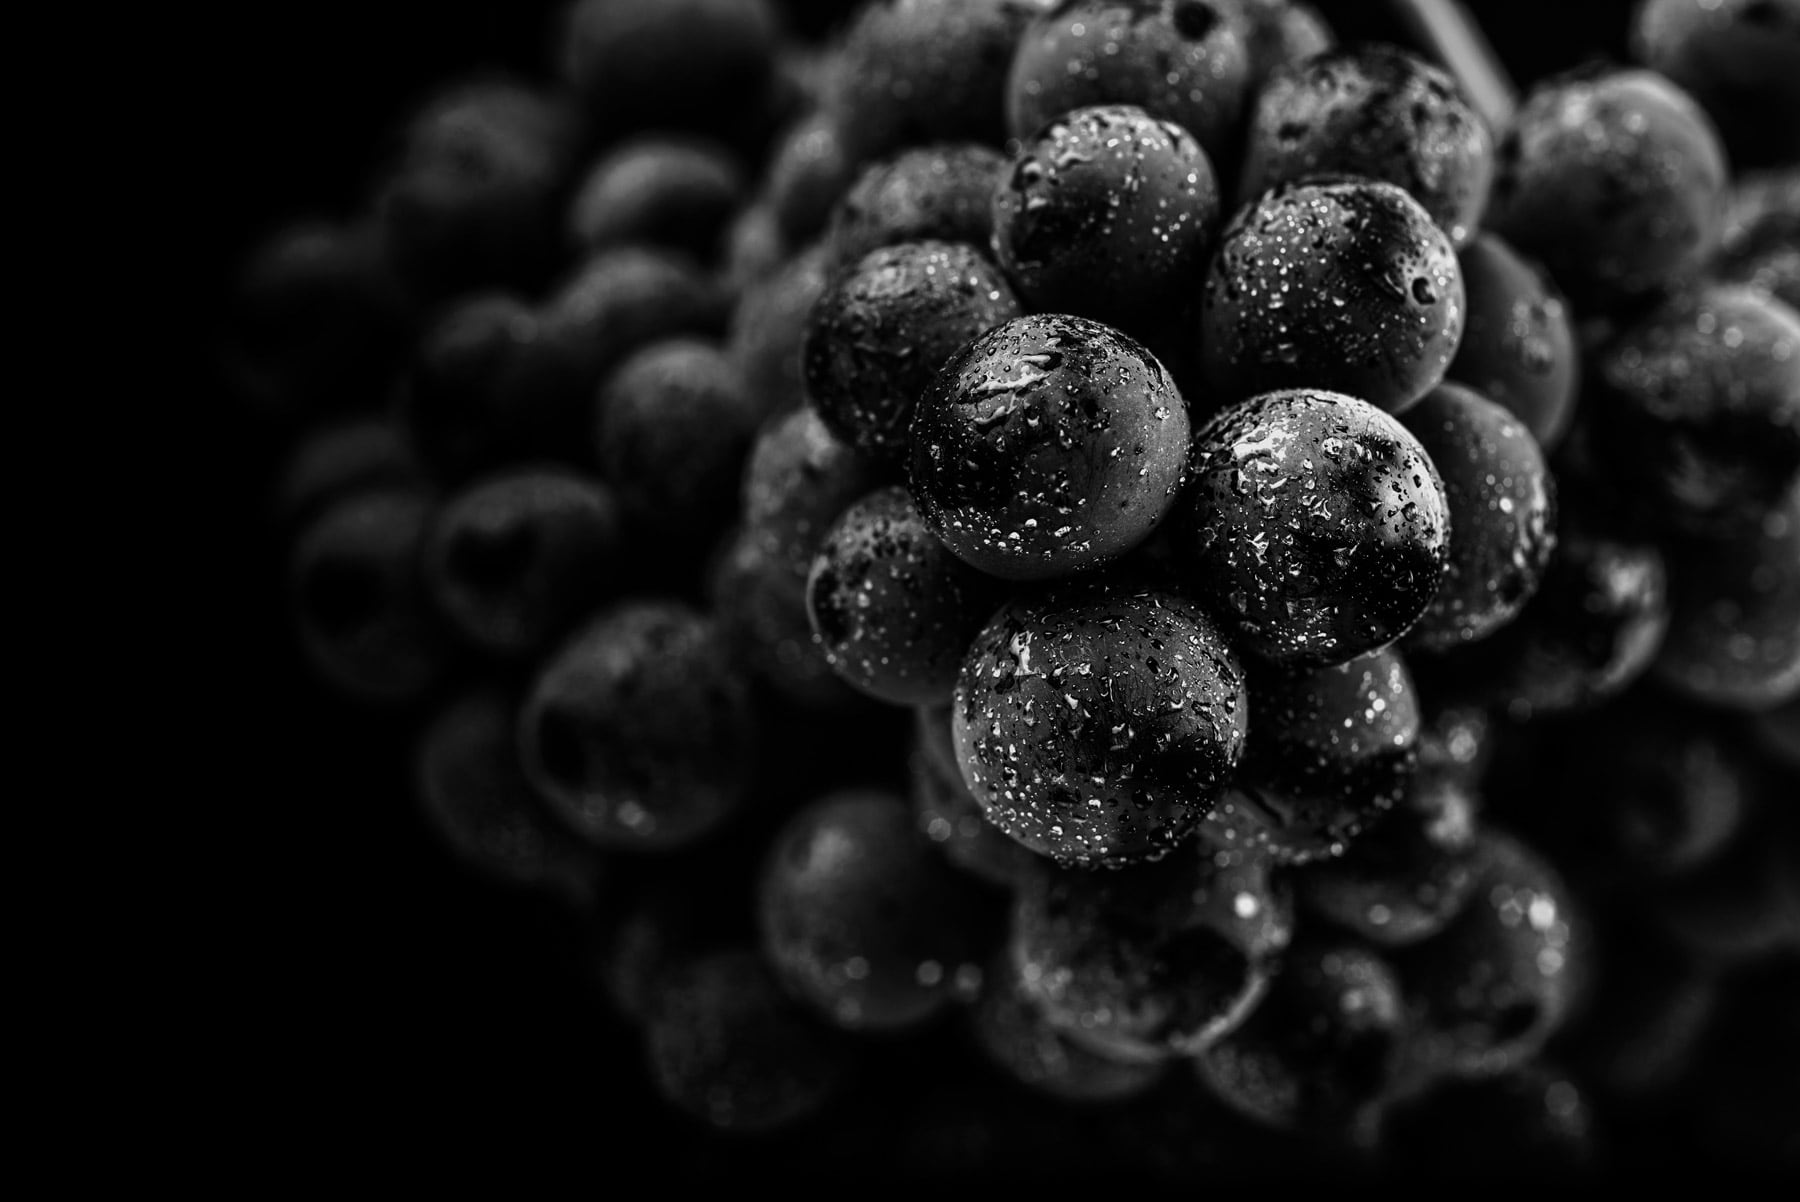 black and white image of grapes